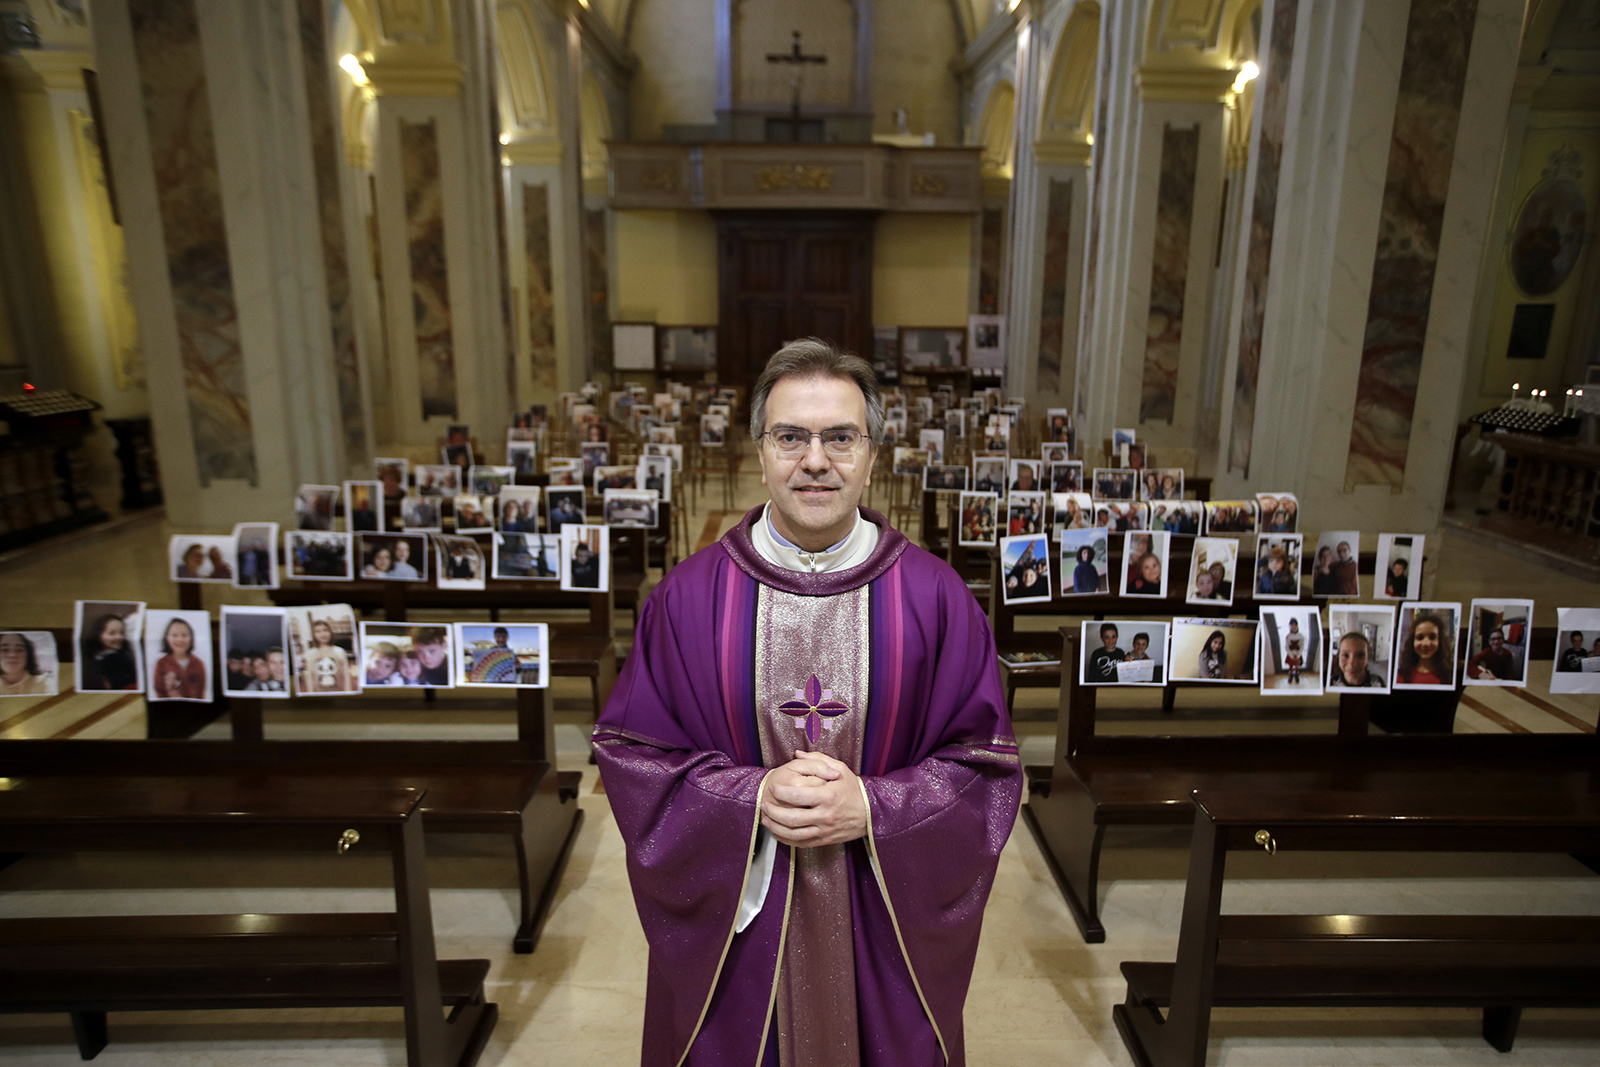 Don Giuseppe Corbari, poses in front of selfies he was sent by parishioners as Masses for the faithful have been suspended following Italy's coronavirus emergency, in Giussano, northern Italy, Sunday, March 15, 2020. (AP Photo/Luca Bruno)